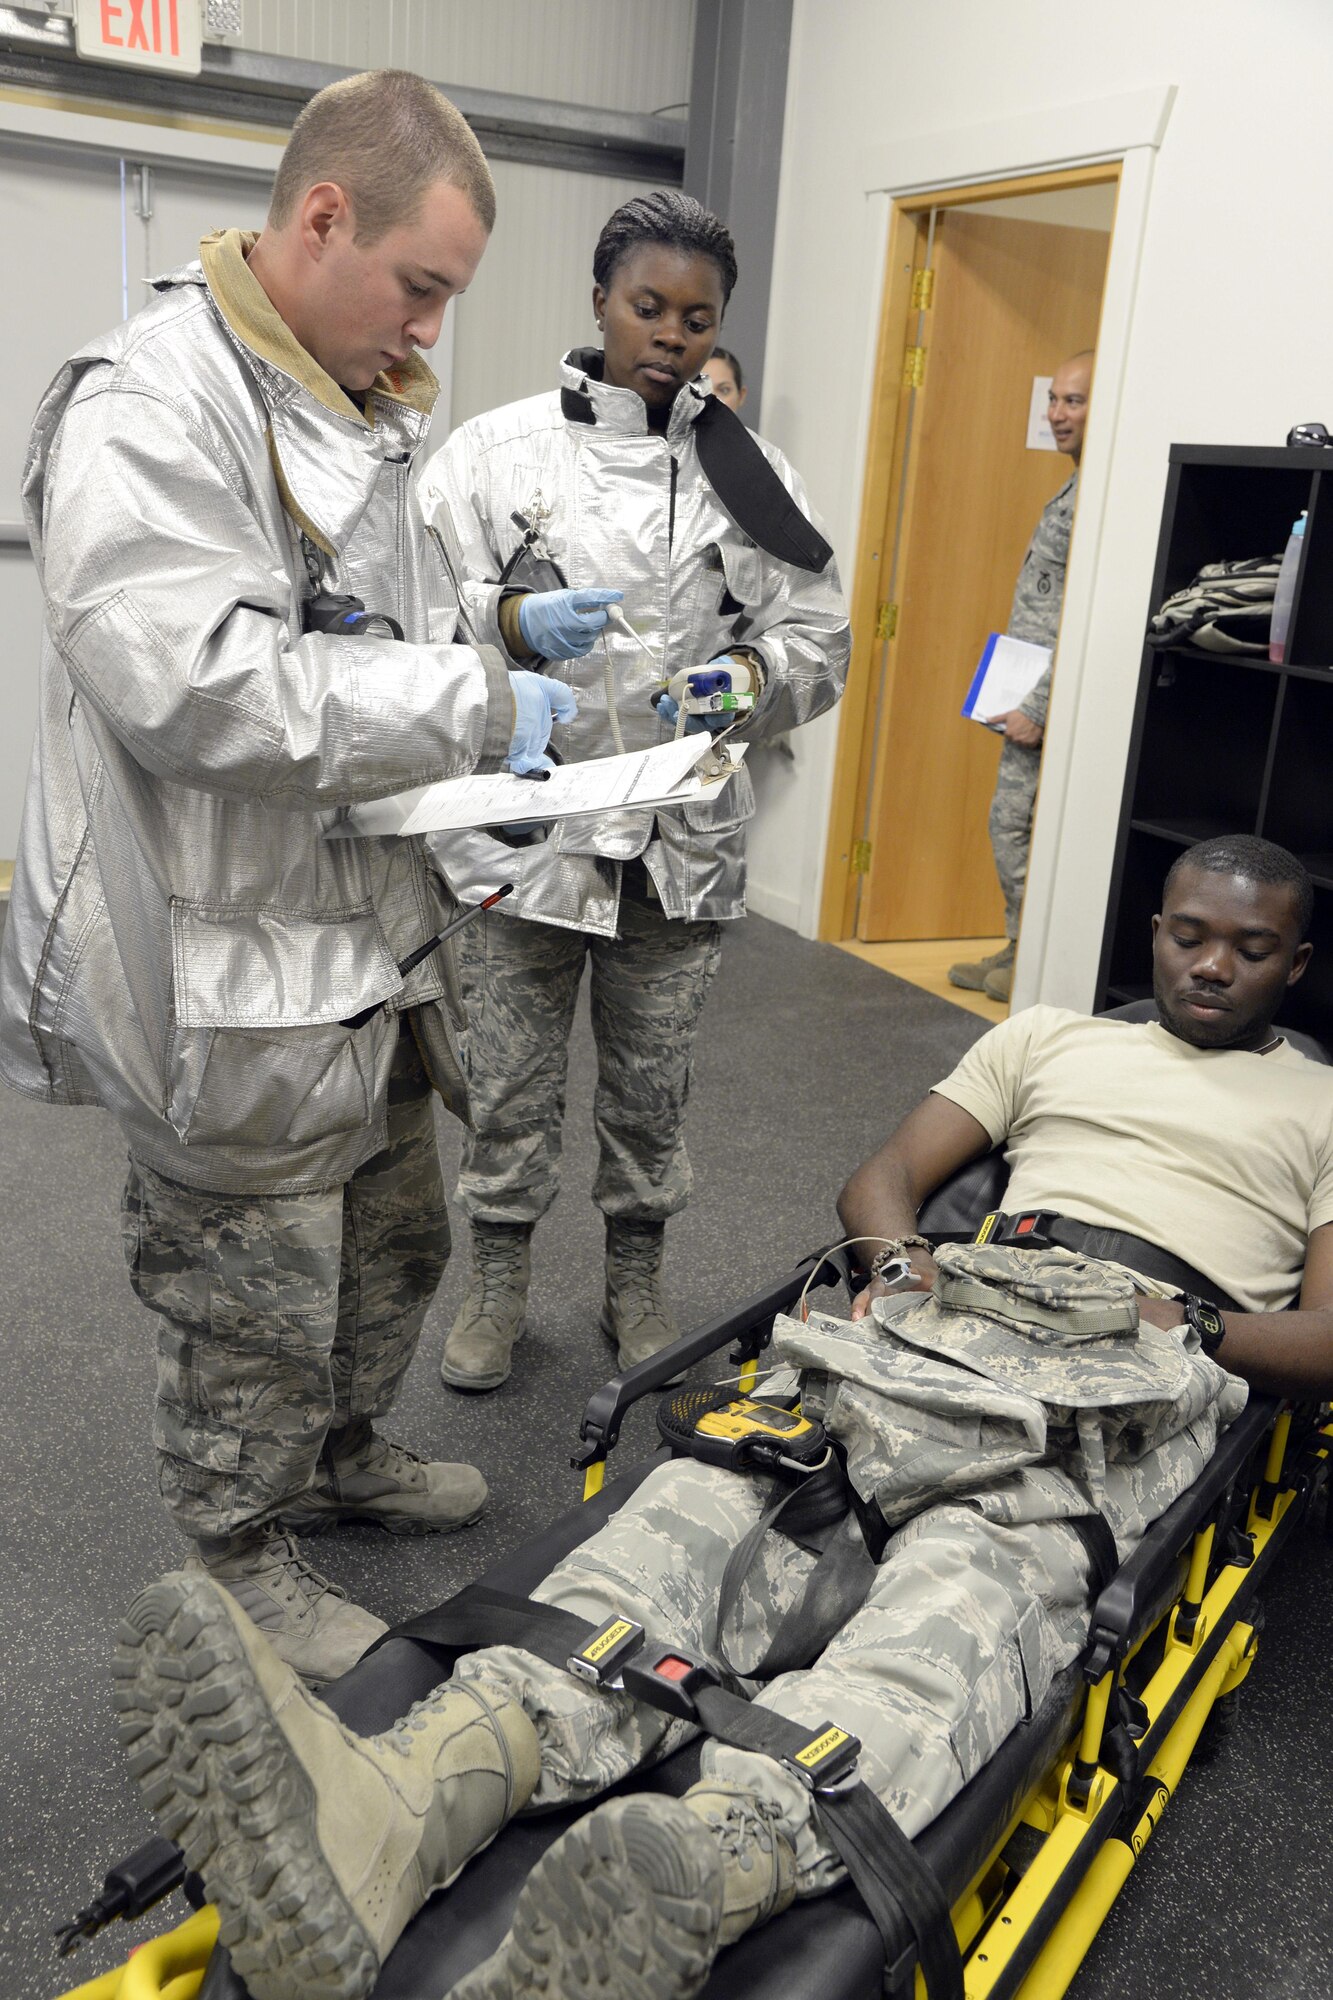 Senior Airman Austin, fire truck driver and operator, and Airman 1st Class Tianna, firefighter, record the vitals of a simulated patient during a training exercise at an undisclosed location in Southwest Asia Jan. 15, 2015. Members of the Expeditionary Medical Group, Expeditionary Force Support Squadron, Expeditionary Civil Engineer Squadron and Expeditionary Security Forces Squadron took part in the exercise. Austin is currently deployed from Travis Air Force Base, Calif., and is a native of Twinfalls, Idaho. Tianna is currently deployed from Beale Air Force Base, Calif., and is a native of Miami, Fla. (U.S. Air Force photo/Tech. Sgt. Marie Brown)